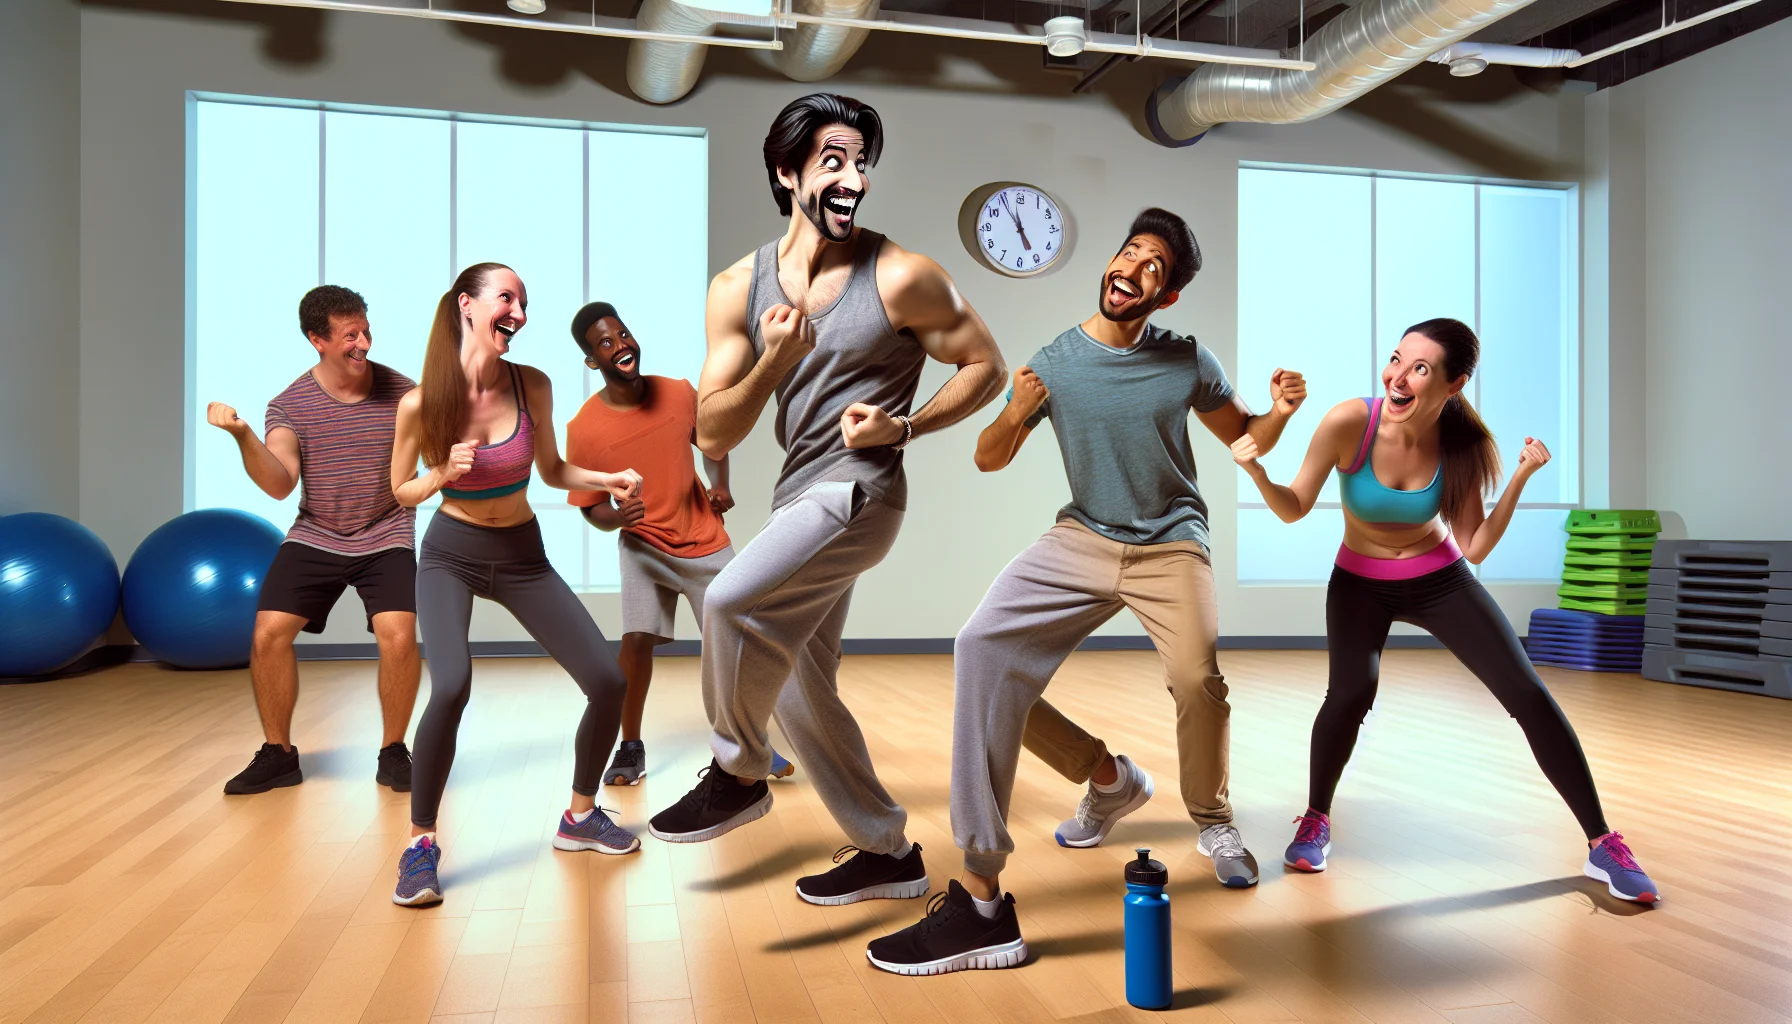 Create a humorous, realistic scene taking place at a generic fitness center where a co-ed group is engaging in a Zumba class. The fitness instructor, a charismatic Middle-Eastern man, is leading the class with zest. A Caucasian woman appears to be quite confused and is going in exactly the opposite direction of the others. A South Asian man is dancing with too much enthusiasm, knocking over a water bottle in the process. A Black woman, however, seems to be in perfect step with the instructor, grinning at her friends' antics. This entertaining scene is making physical health and fitness look appealing and approachable.